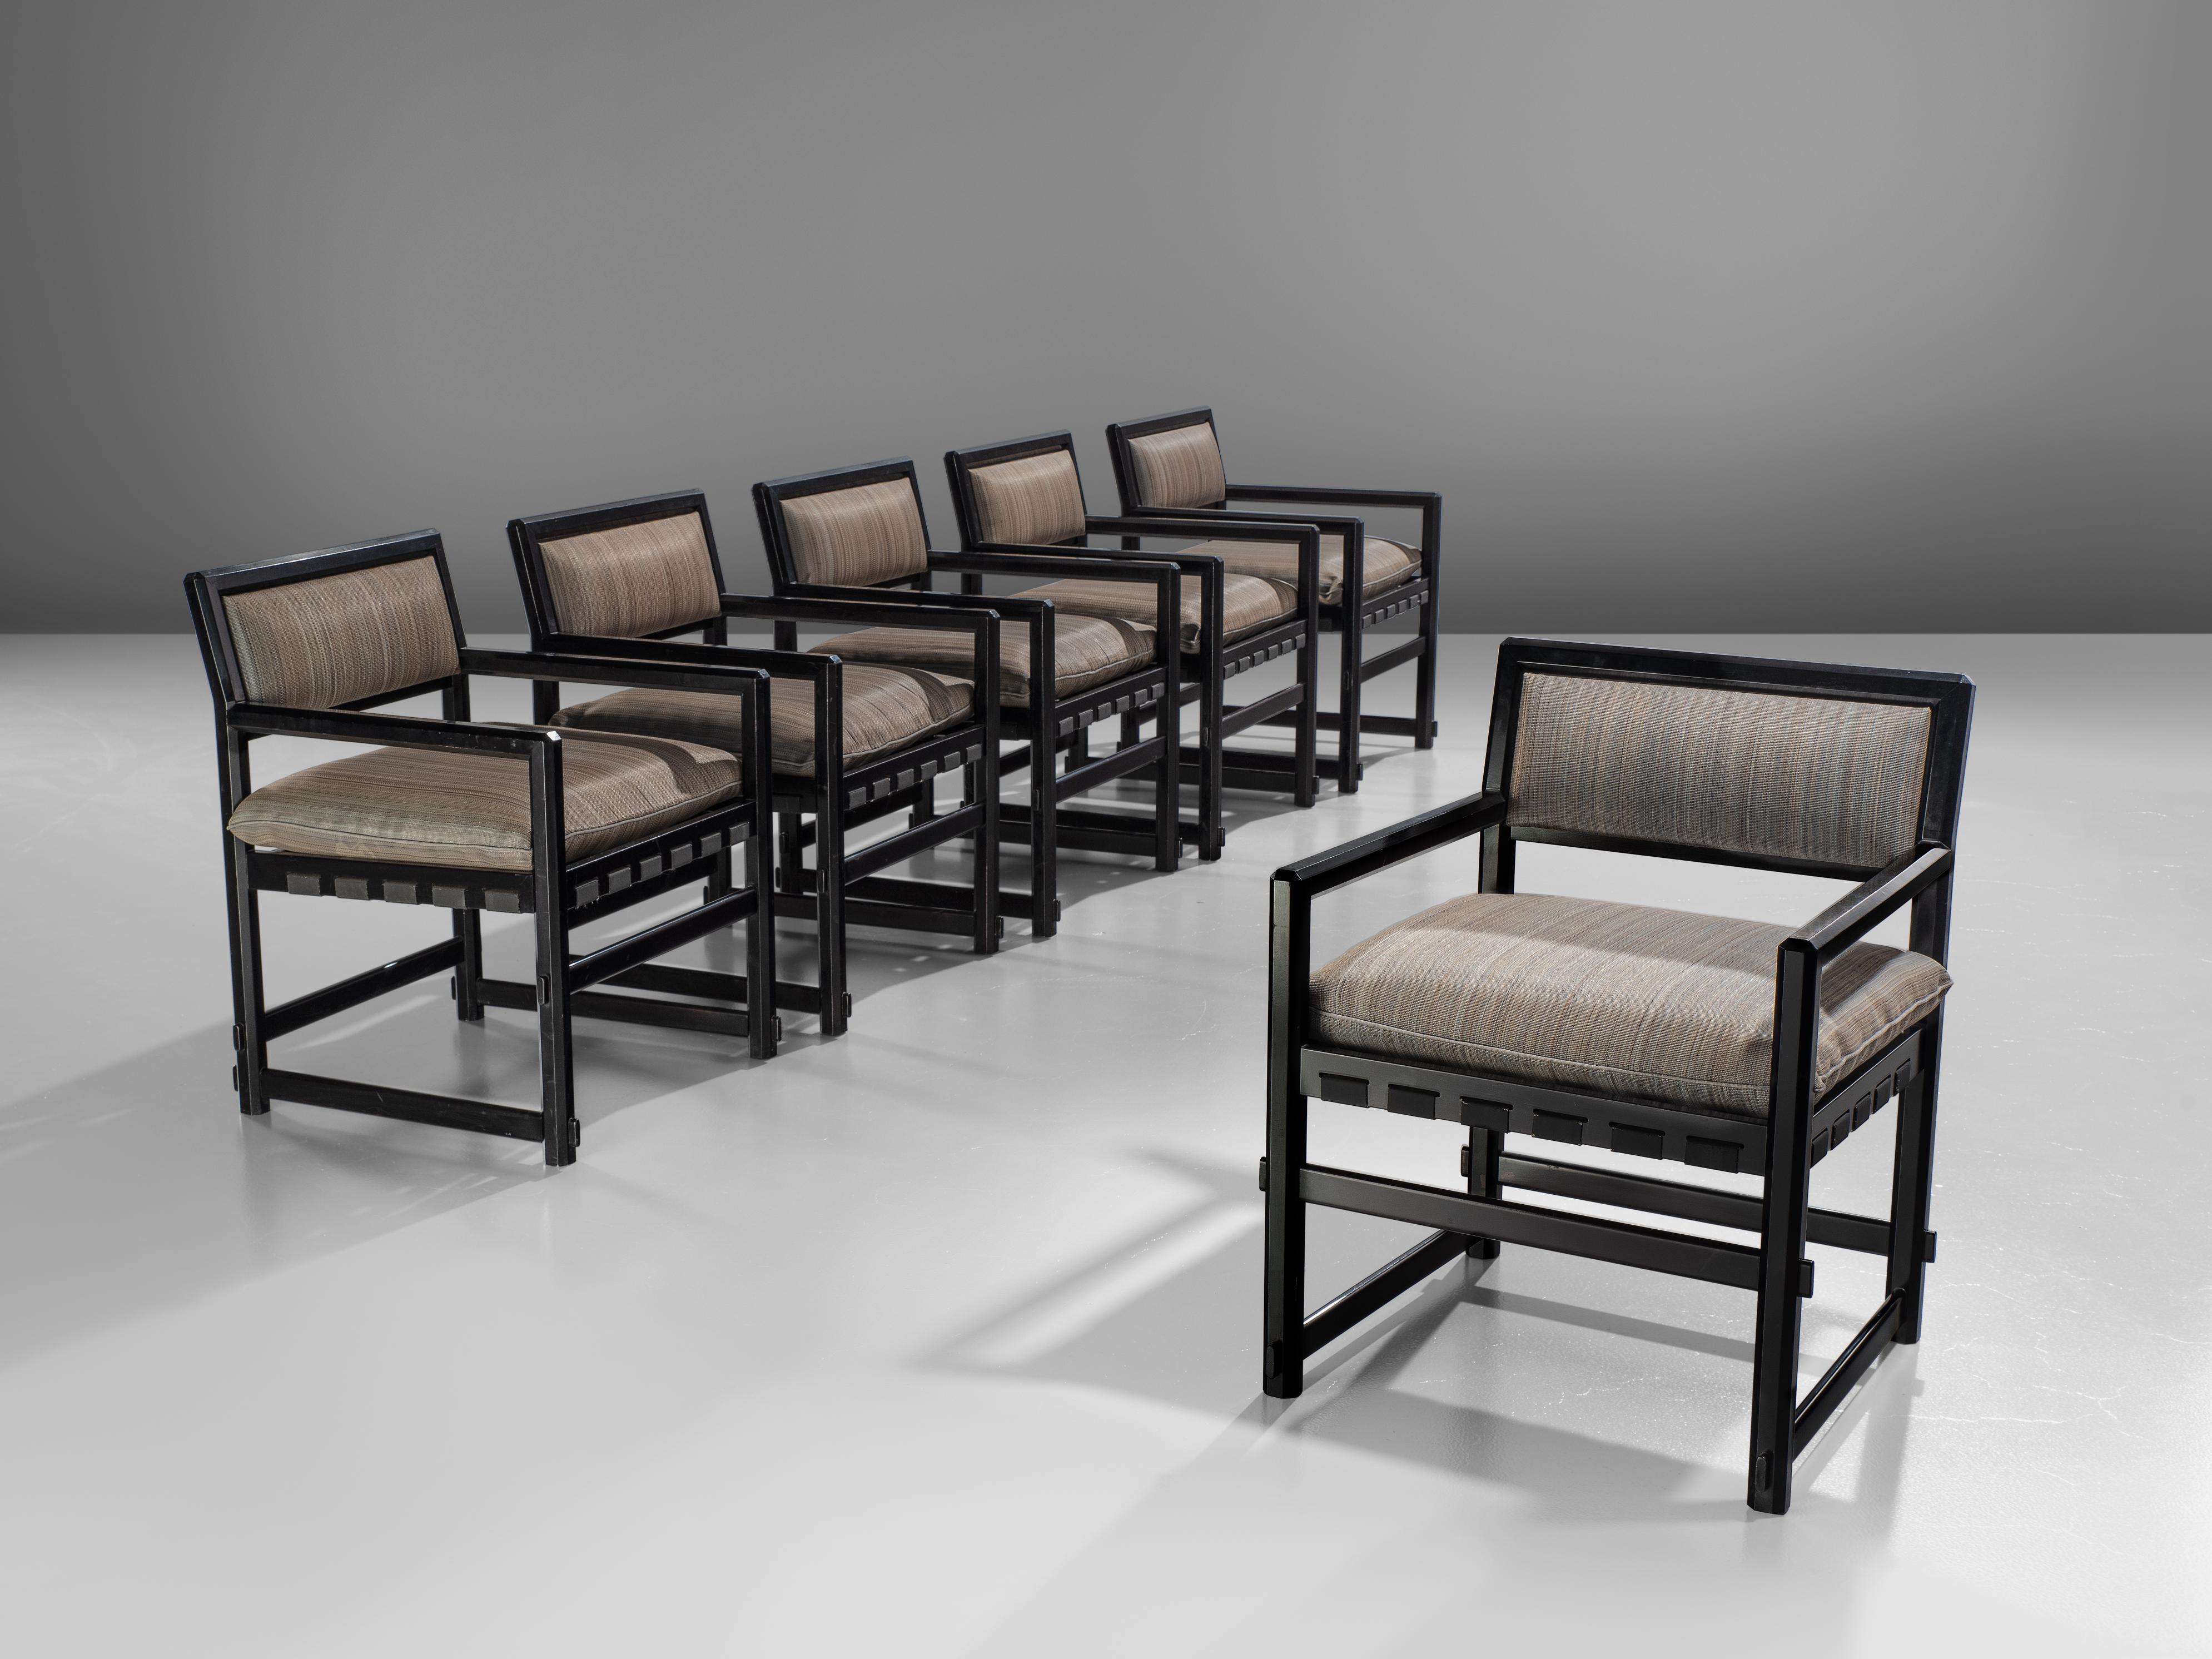 Set of four armchairs, lacquered black wood and fabric, design by Edward Wormely for Dunbar executed by Mobilier Universel, Jules Wabbes, Belgium, 1960s.

This set of four grand armchairs is executed with a rare black lacquered frame and soft